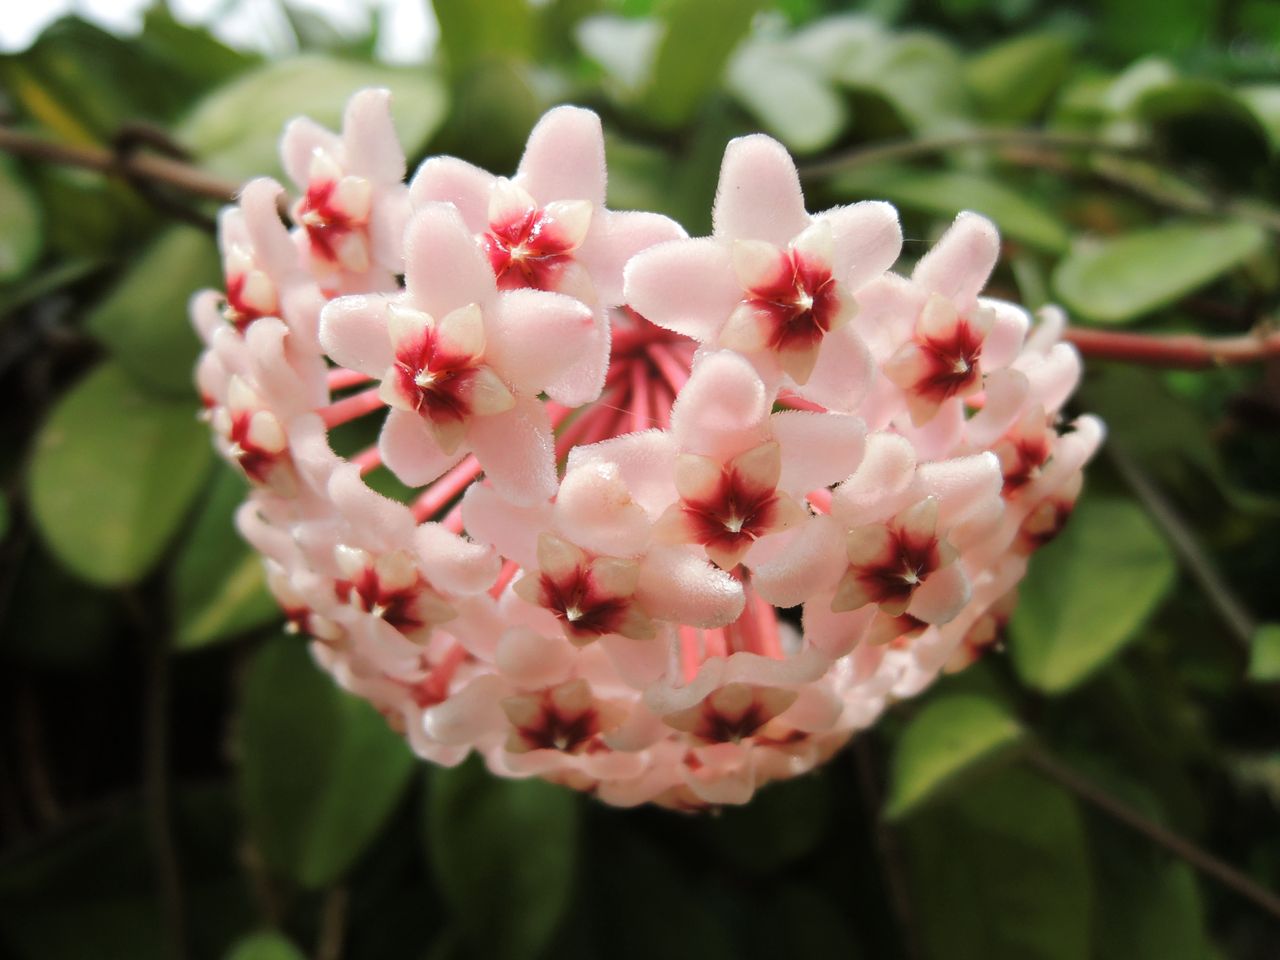 Hoya: The beautiful houseplant with a reputation for bad luck